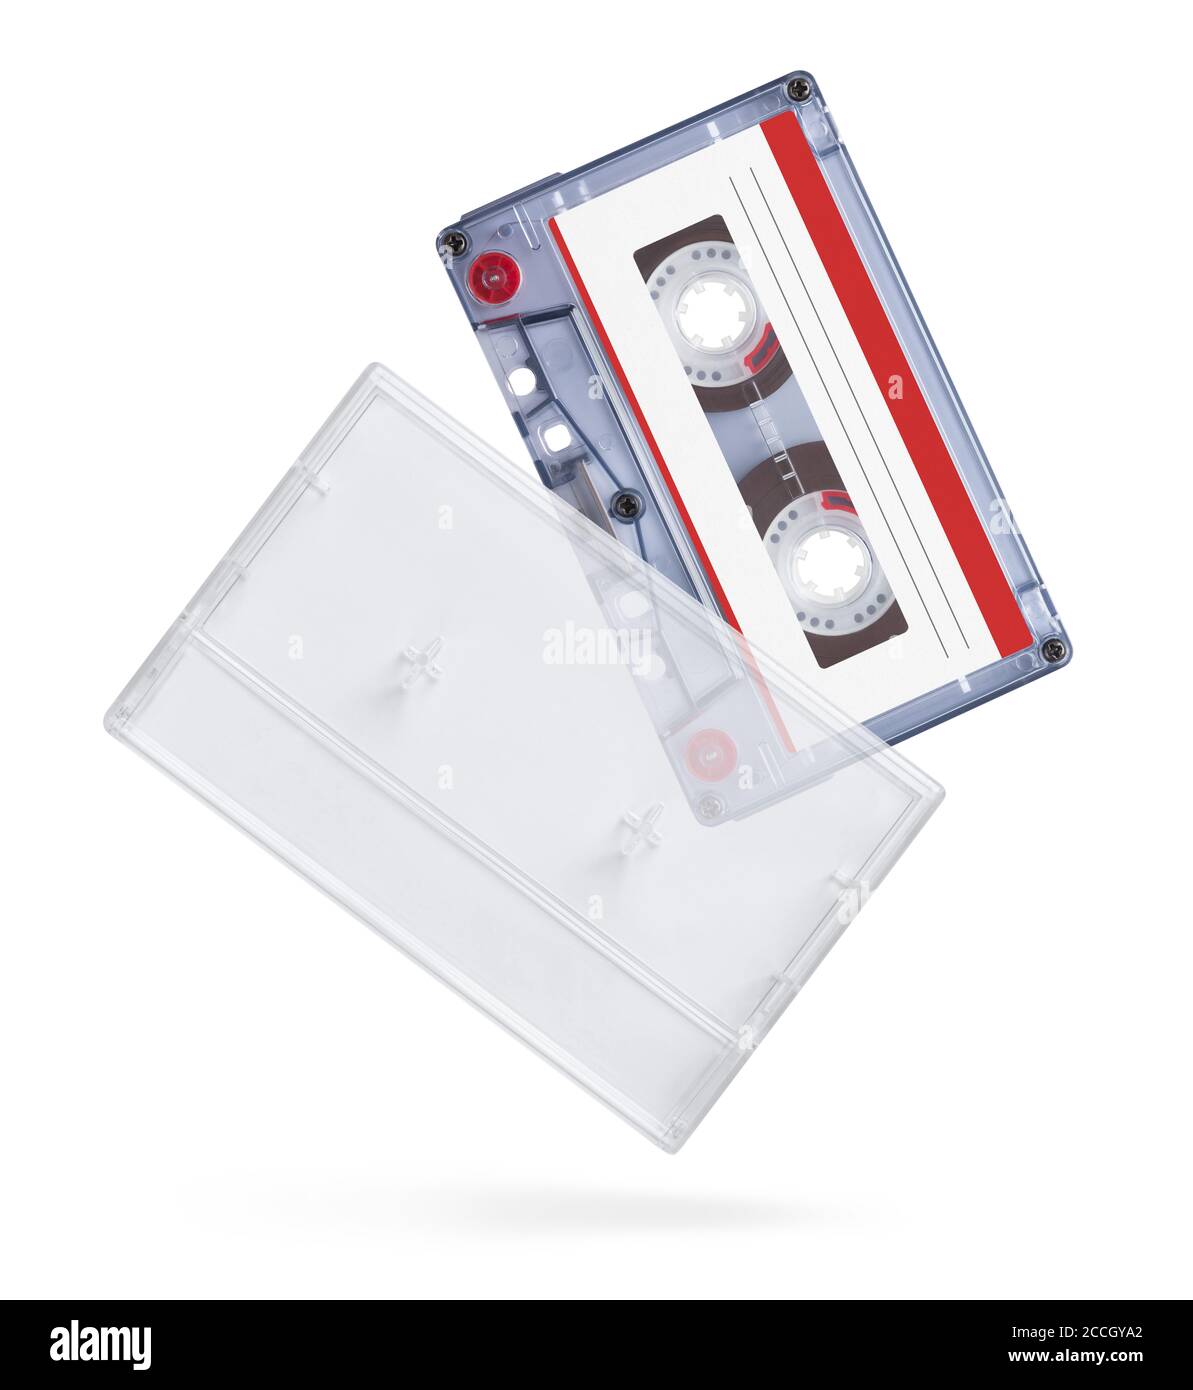 Blank compact cassette tape box design mockup view. Vintage cassete tape  record case box mock up. Plastic analog magnetic tape cassette clear  packaging template. Mixtape box cover. Stock Photo